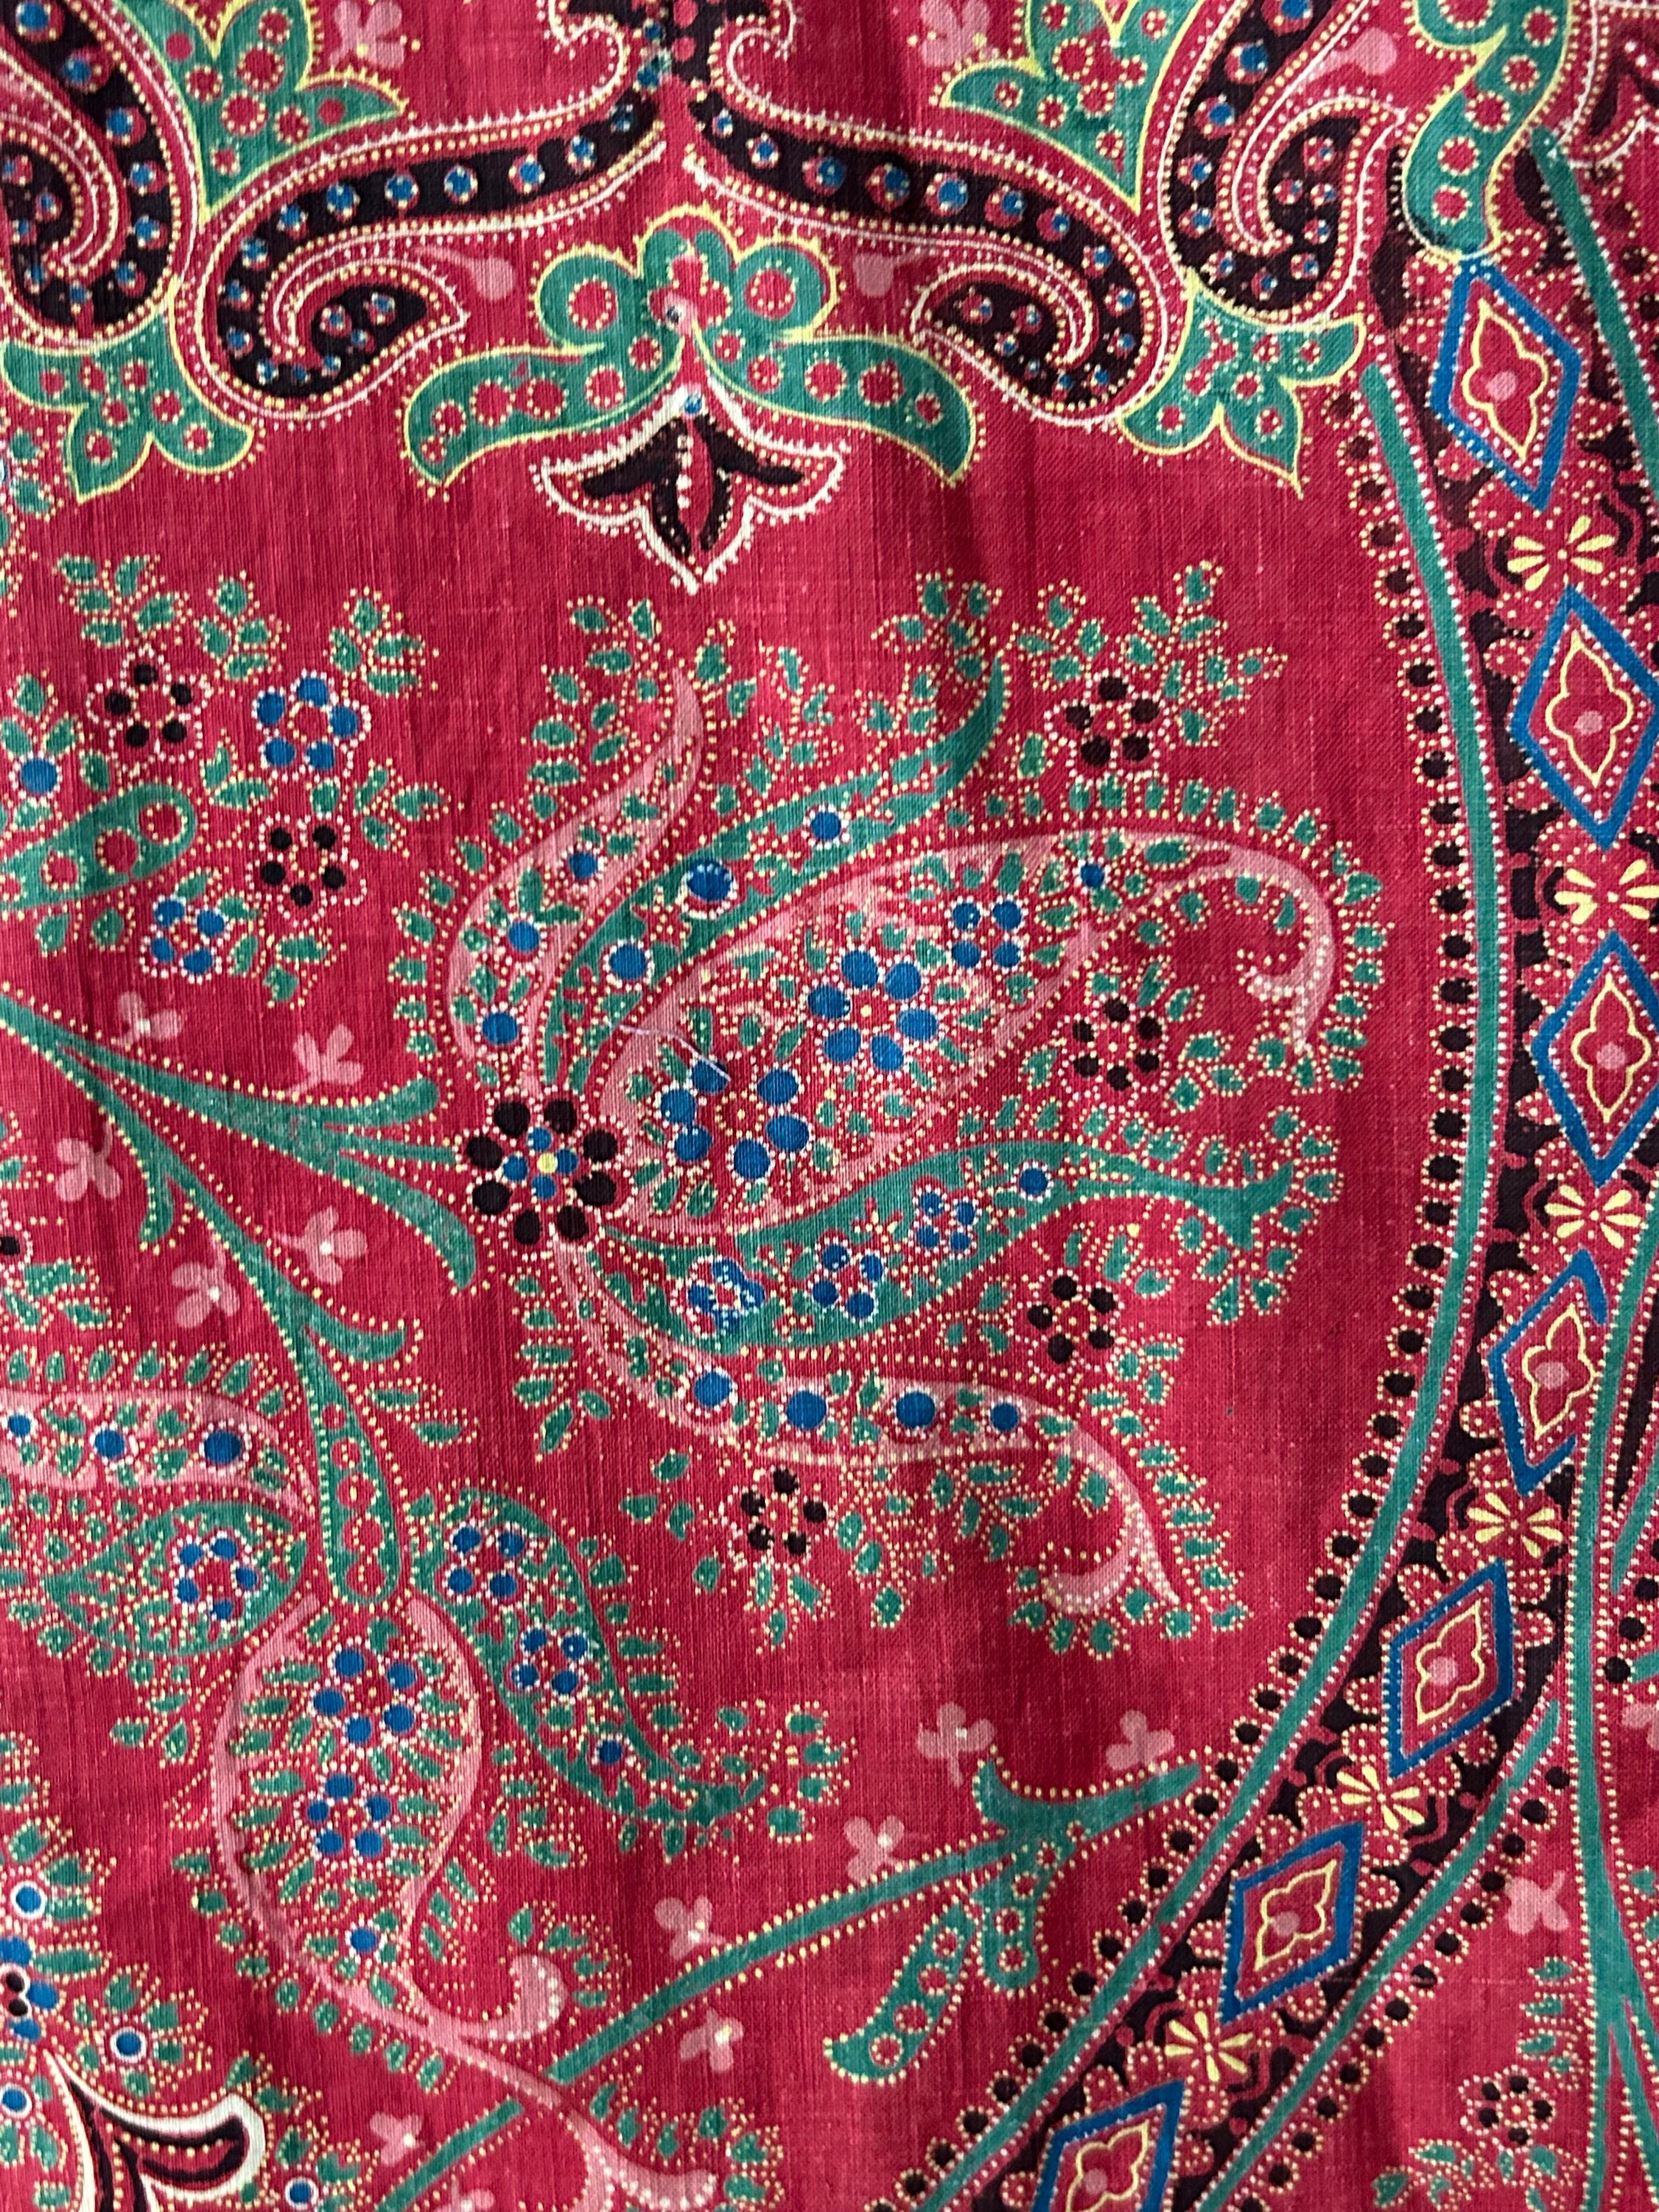 Large Antique Paisley Curtain Textile in Red with Pattern, France, 19th Century For Sale 2